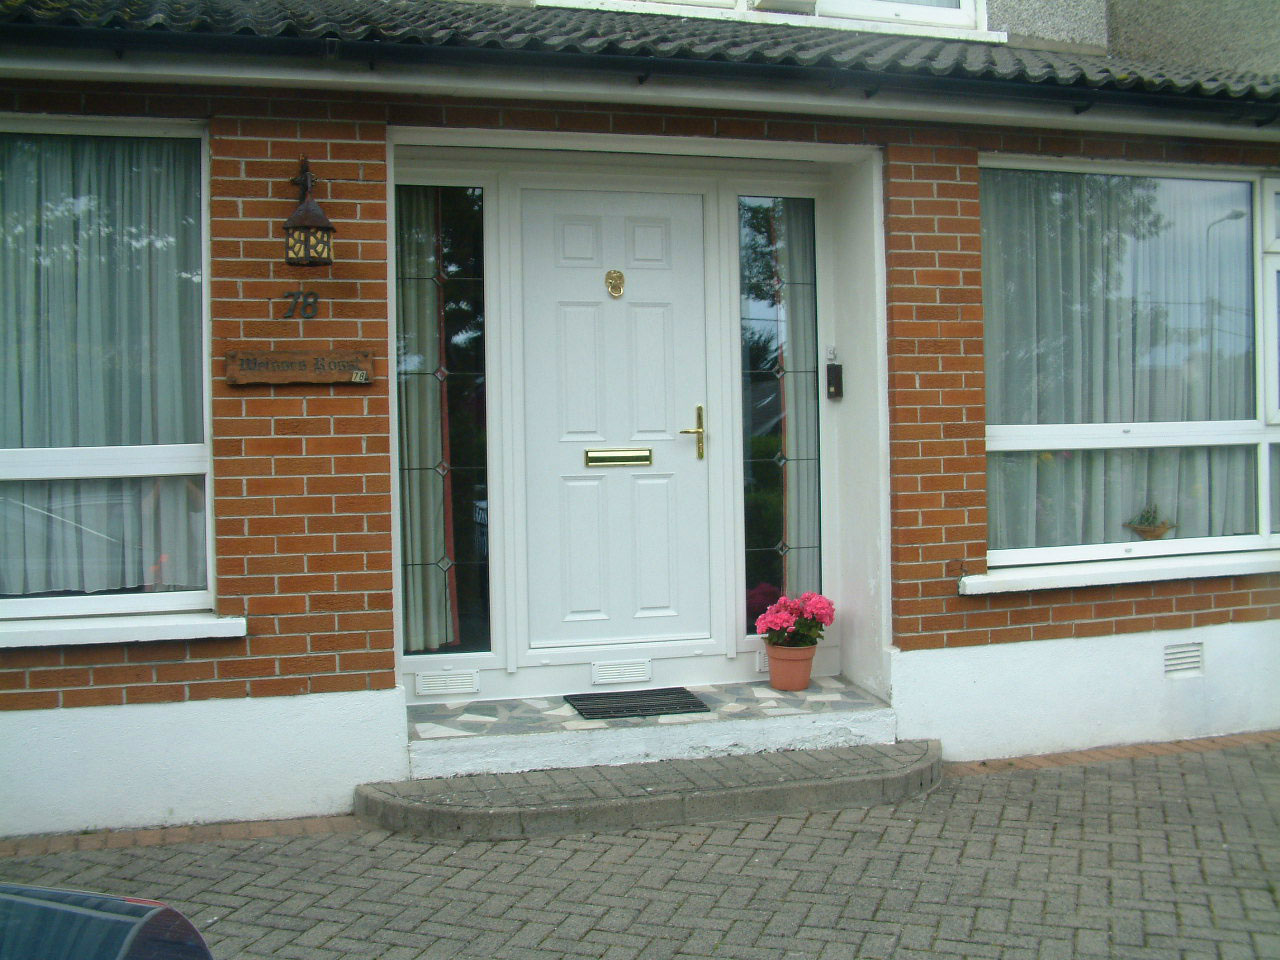 WHITE APEER APA1 COMPOSITE FRONT DOOR FITTED BY ASGARD WINDOWS IN DUBLIN 18.